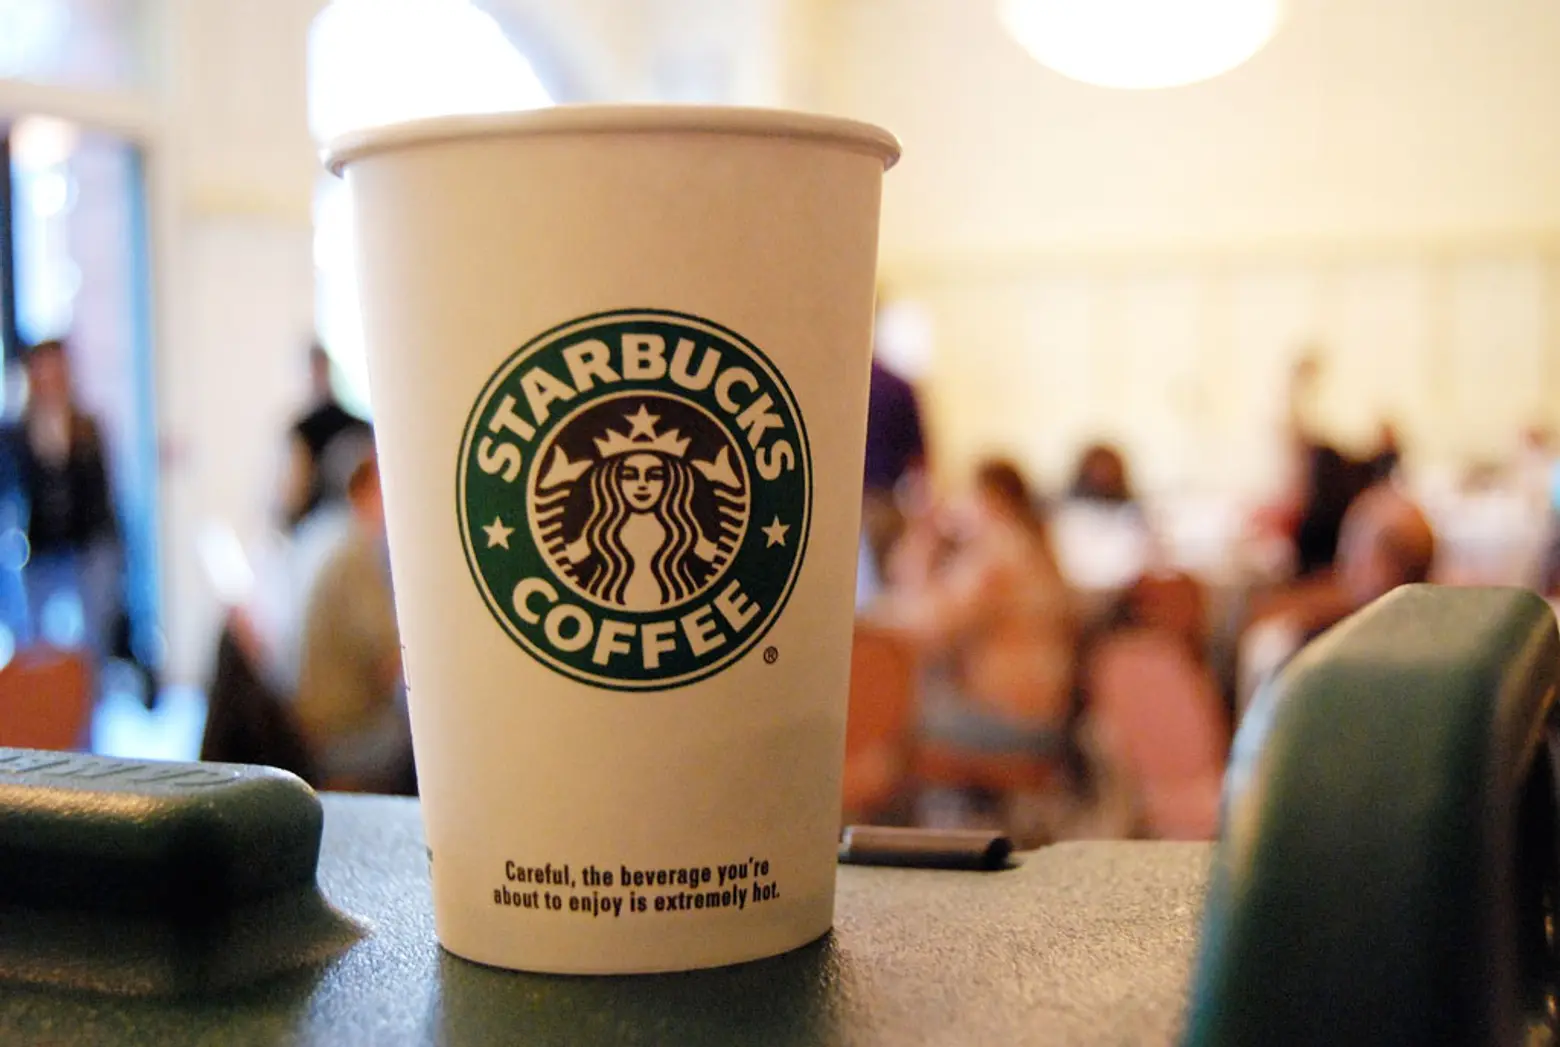 Starbucks ‘Express’ Store Lands in Manhattan; Is This the Largest Personal LEGO Collection?